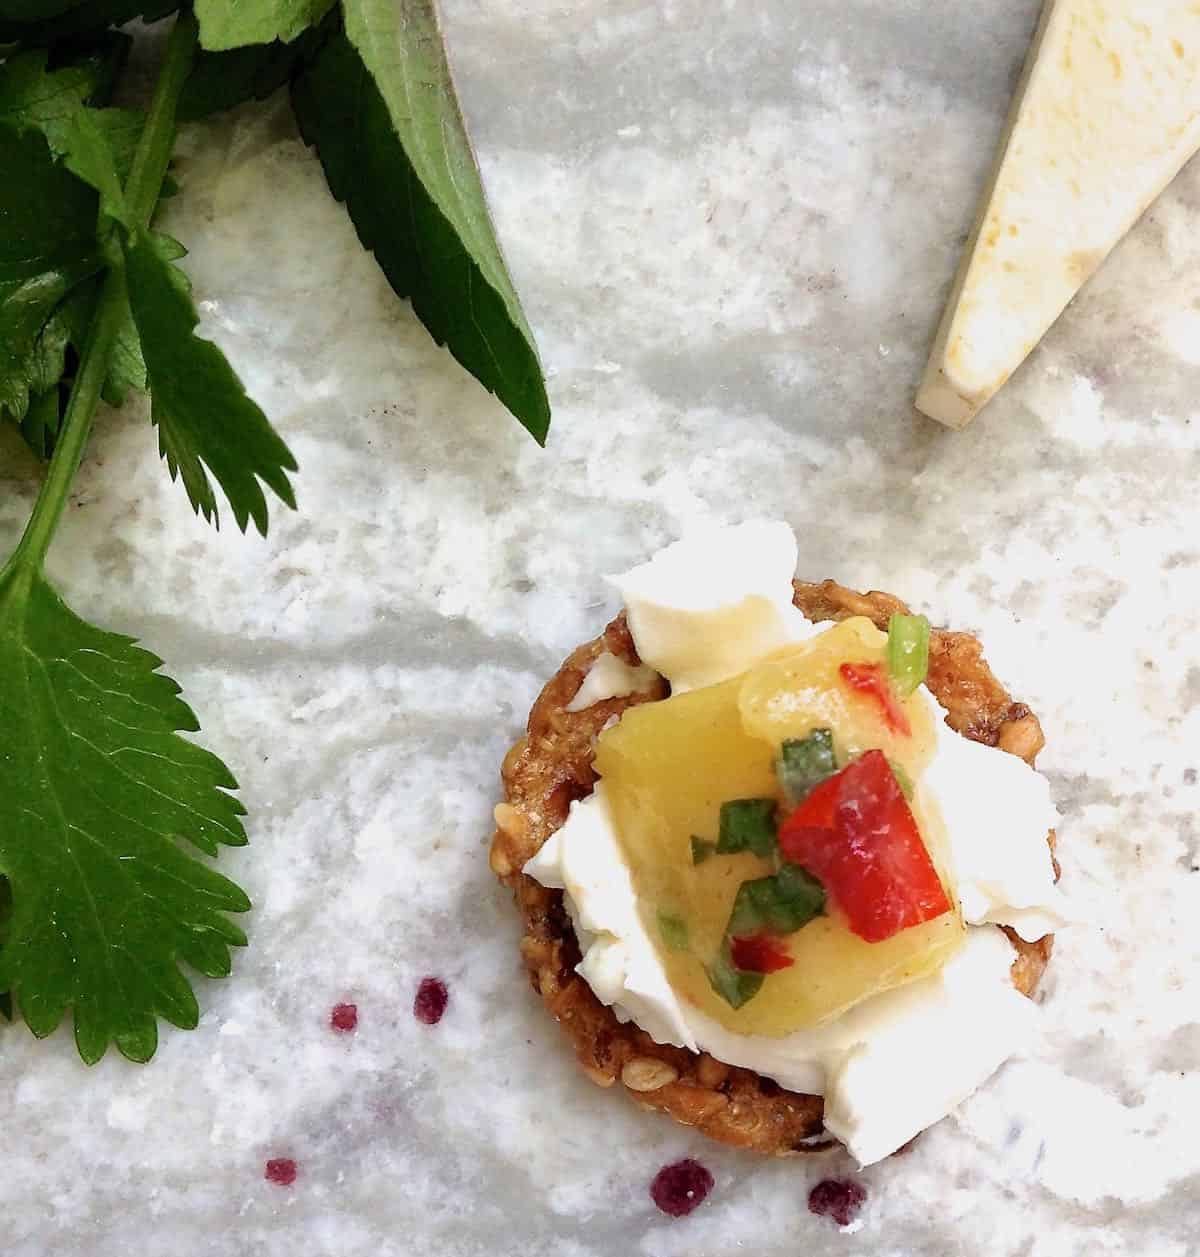 Spread a cracker with your favorite soft cheese and top with some fresh Jezebel Salsa.